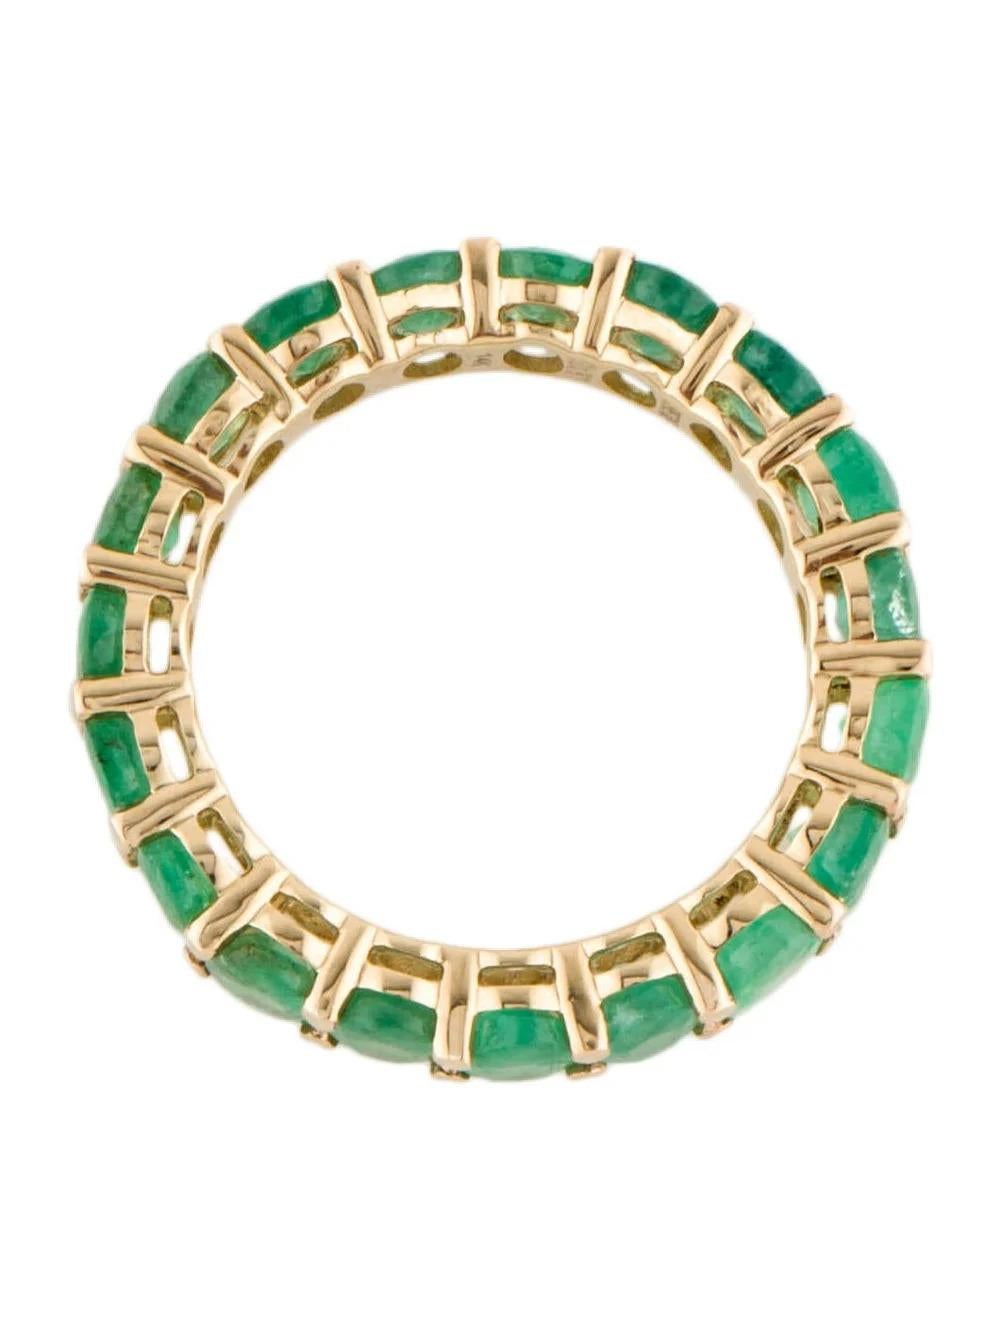 Designer 14K Emerald Eternity Band Ring - 3.69ctw, Size 7, Green Gemstone Design In New Condition For Sale In Holtsville, NY